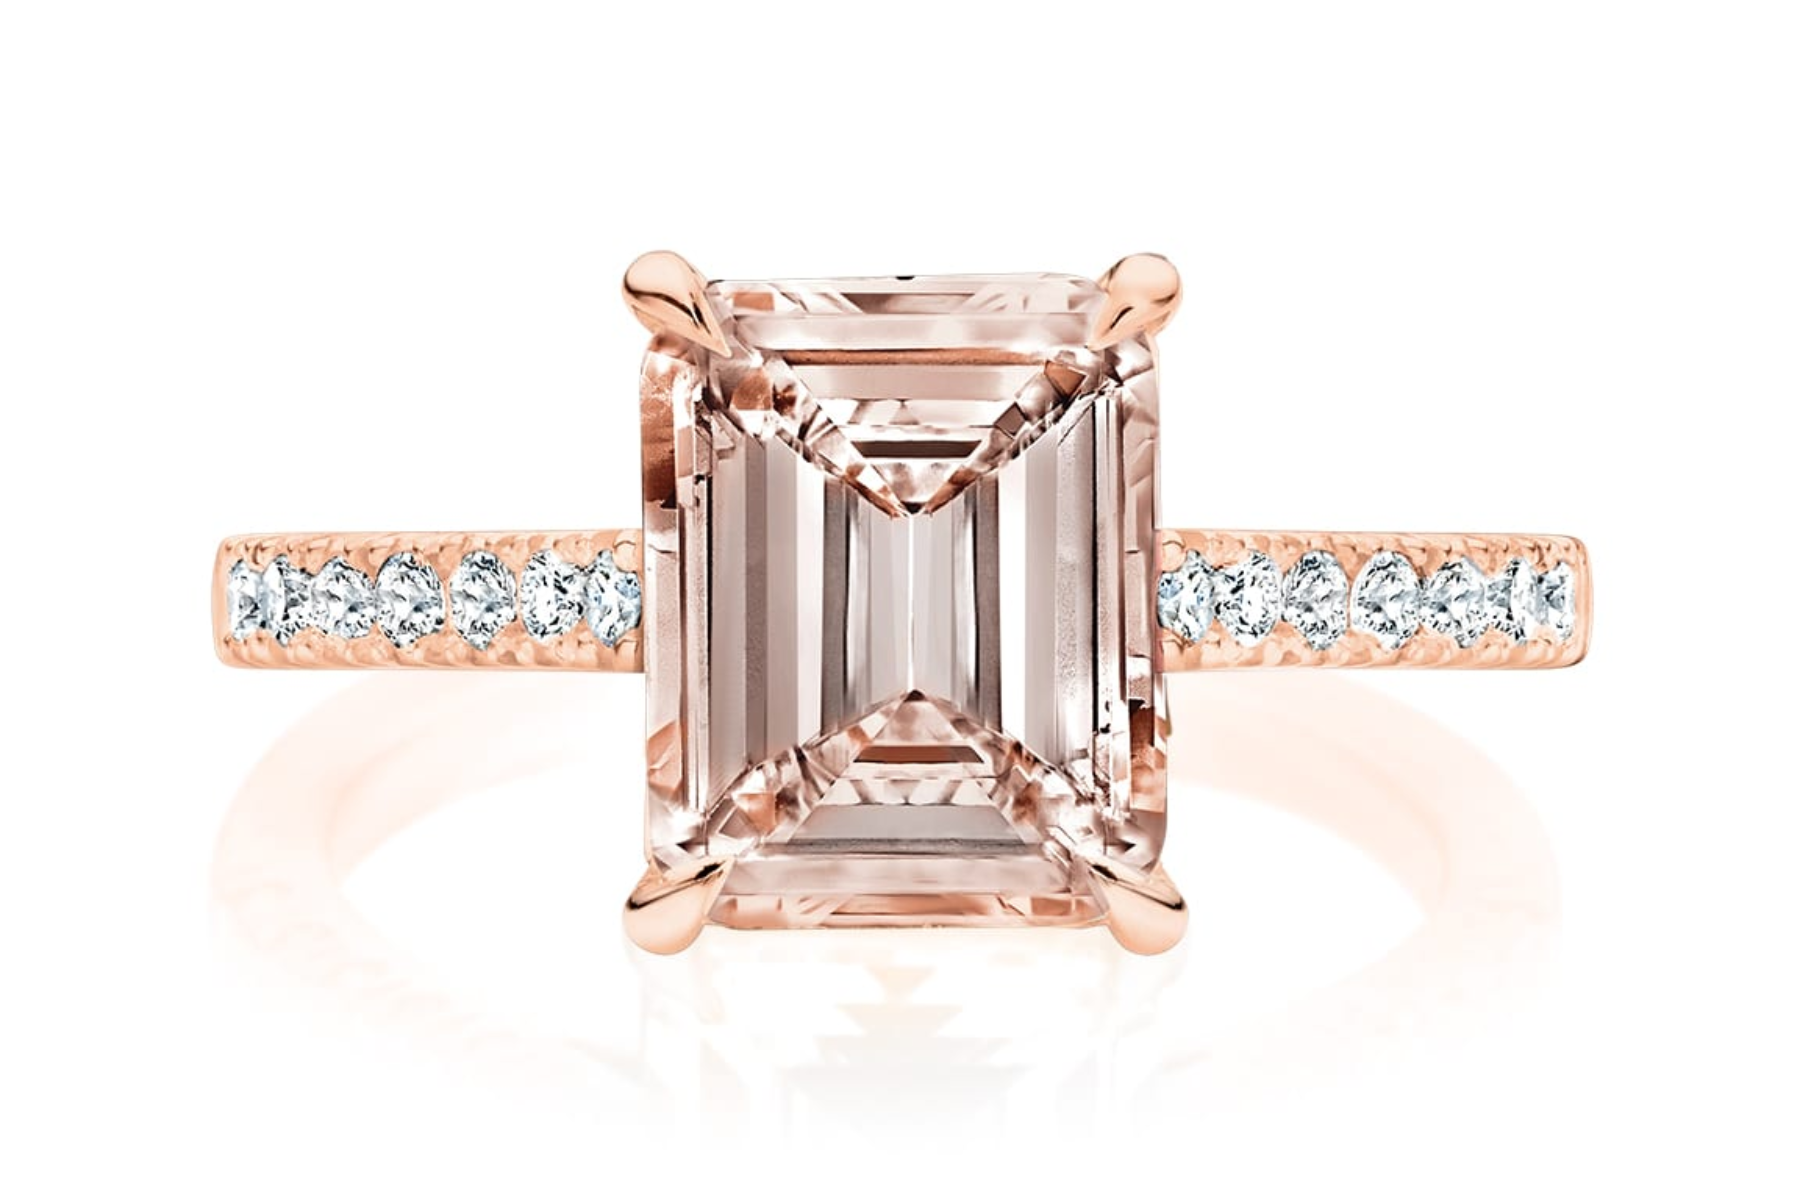 A diamond ring with an emerald cut